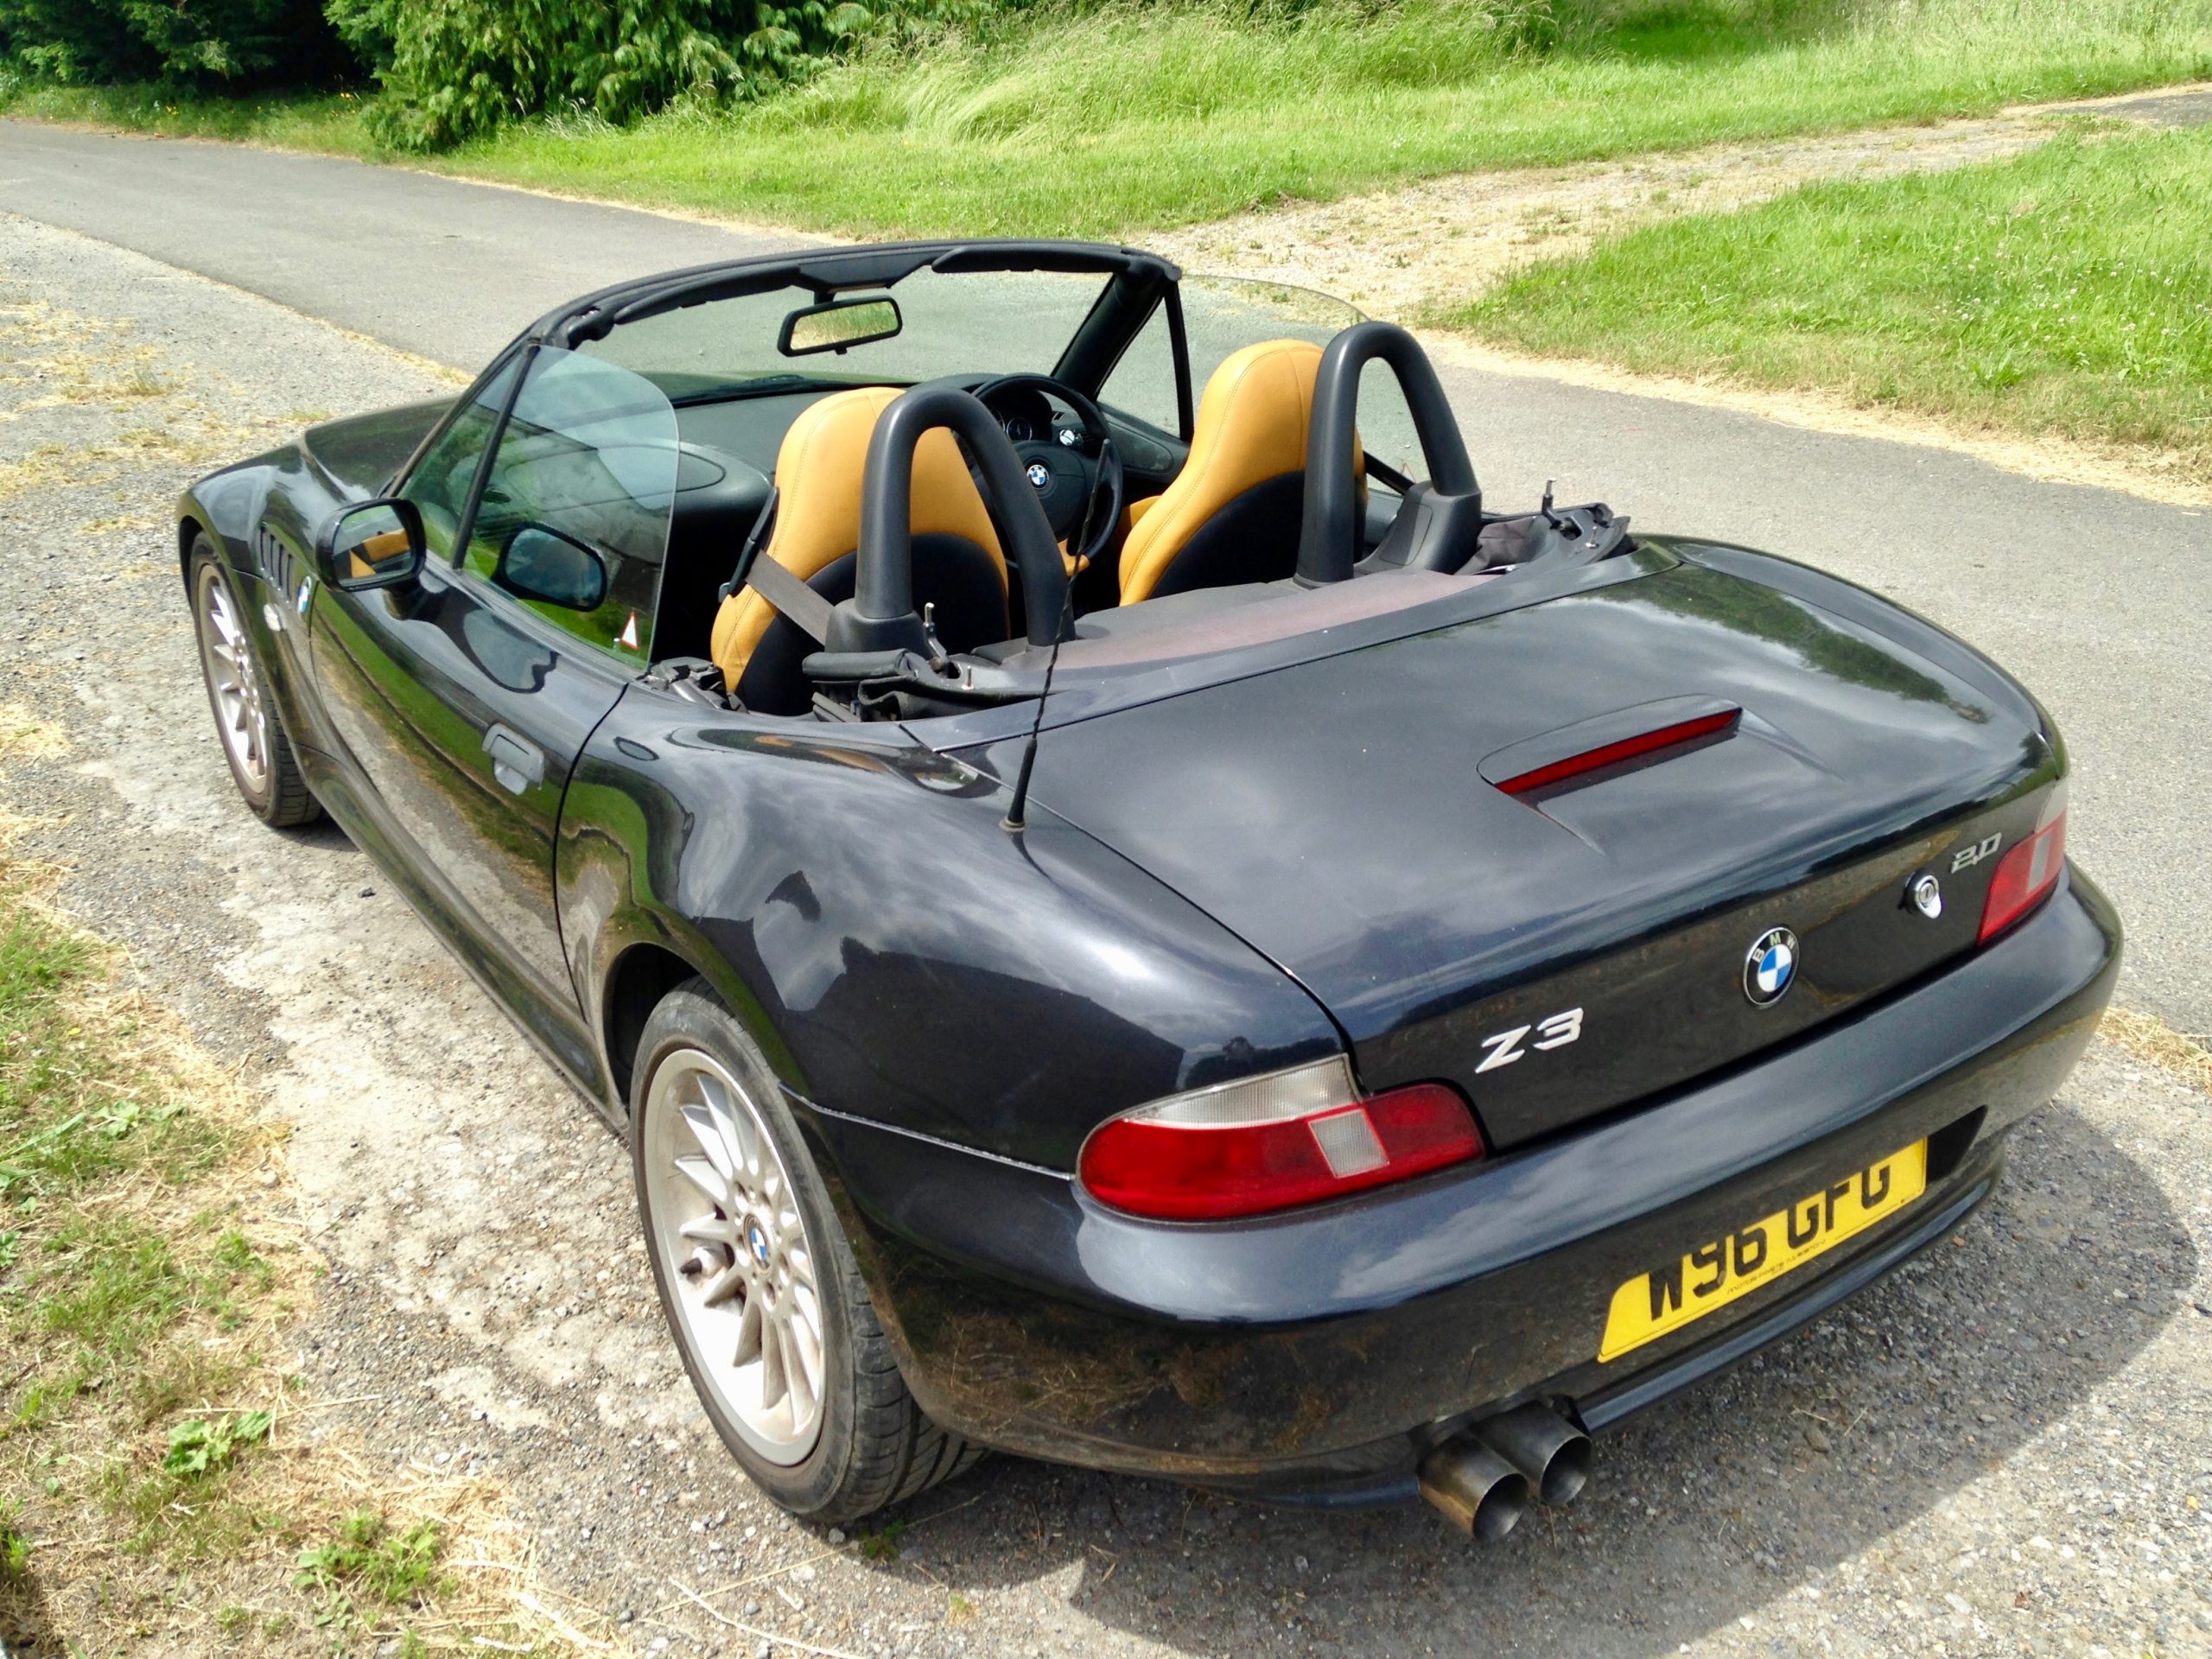 The BMW Z3 is the Best Budget Bimmer You Can Buy